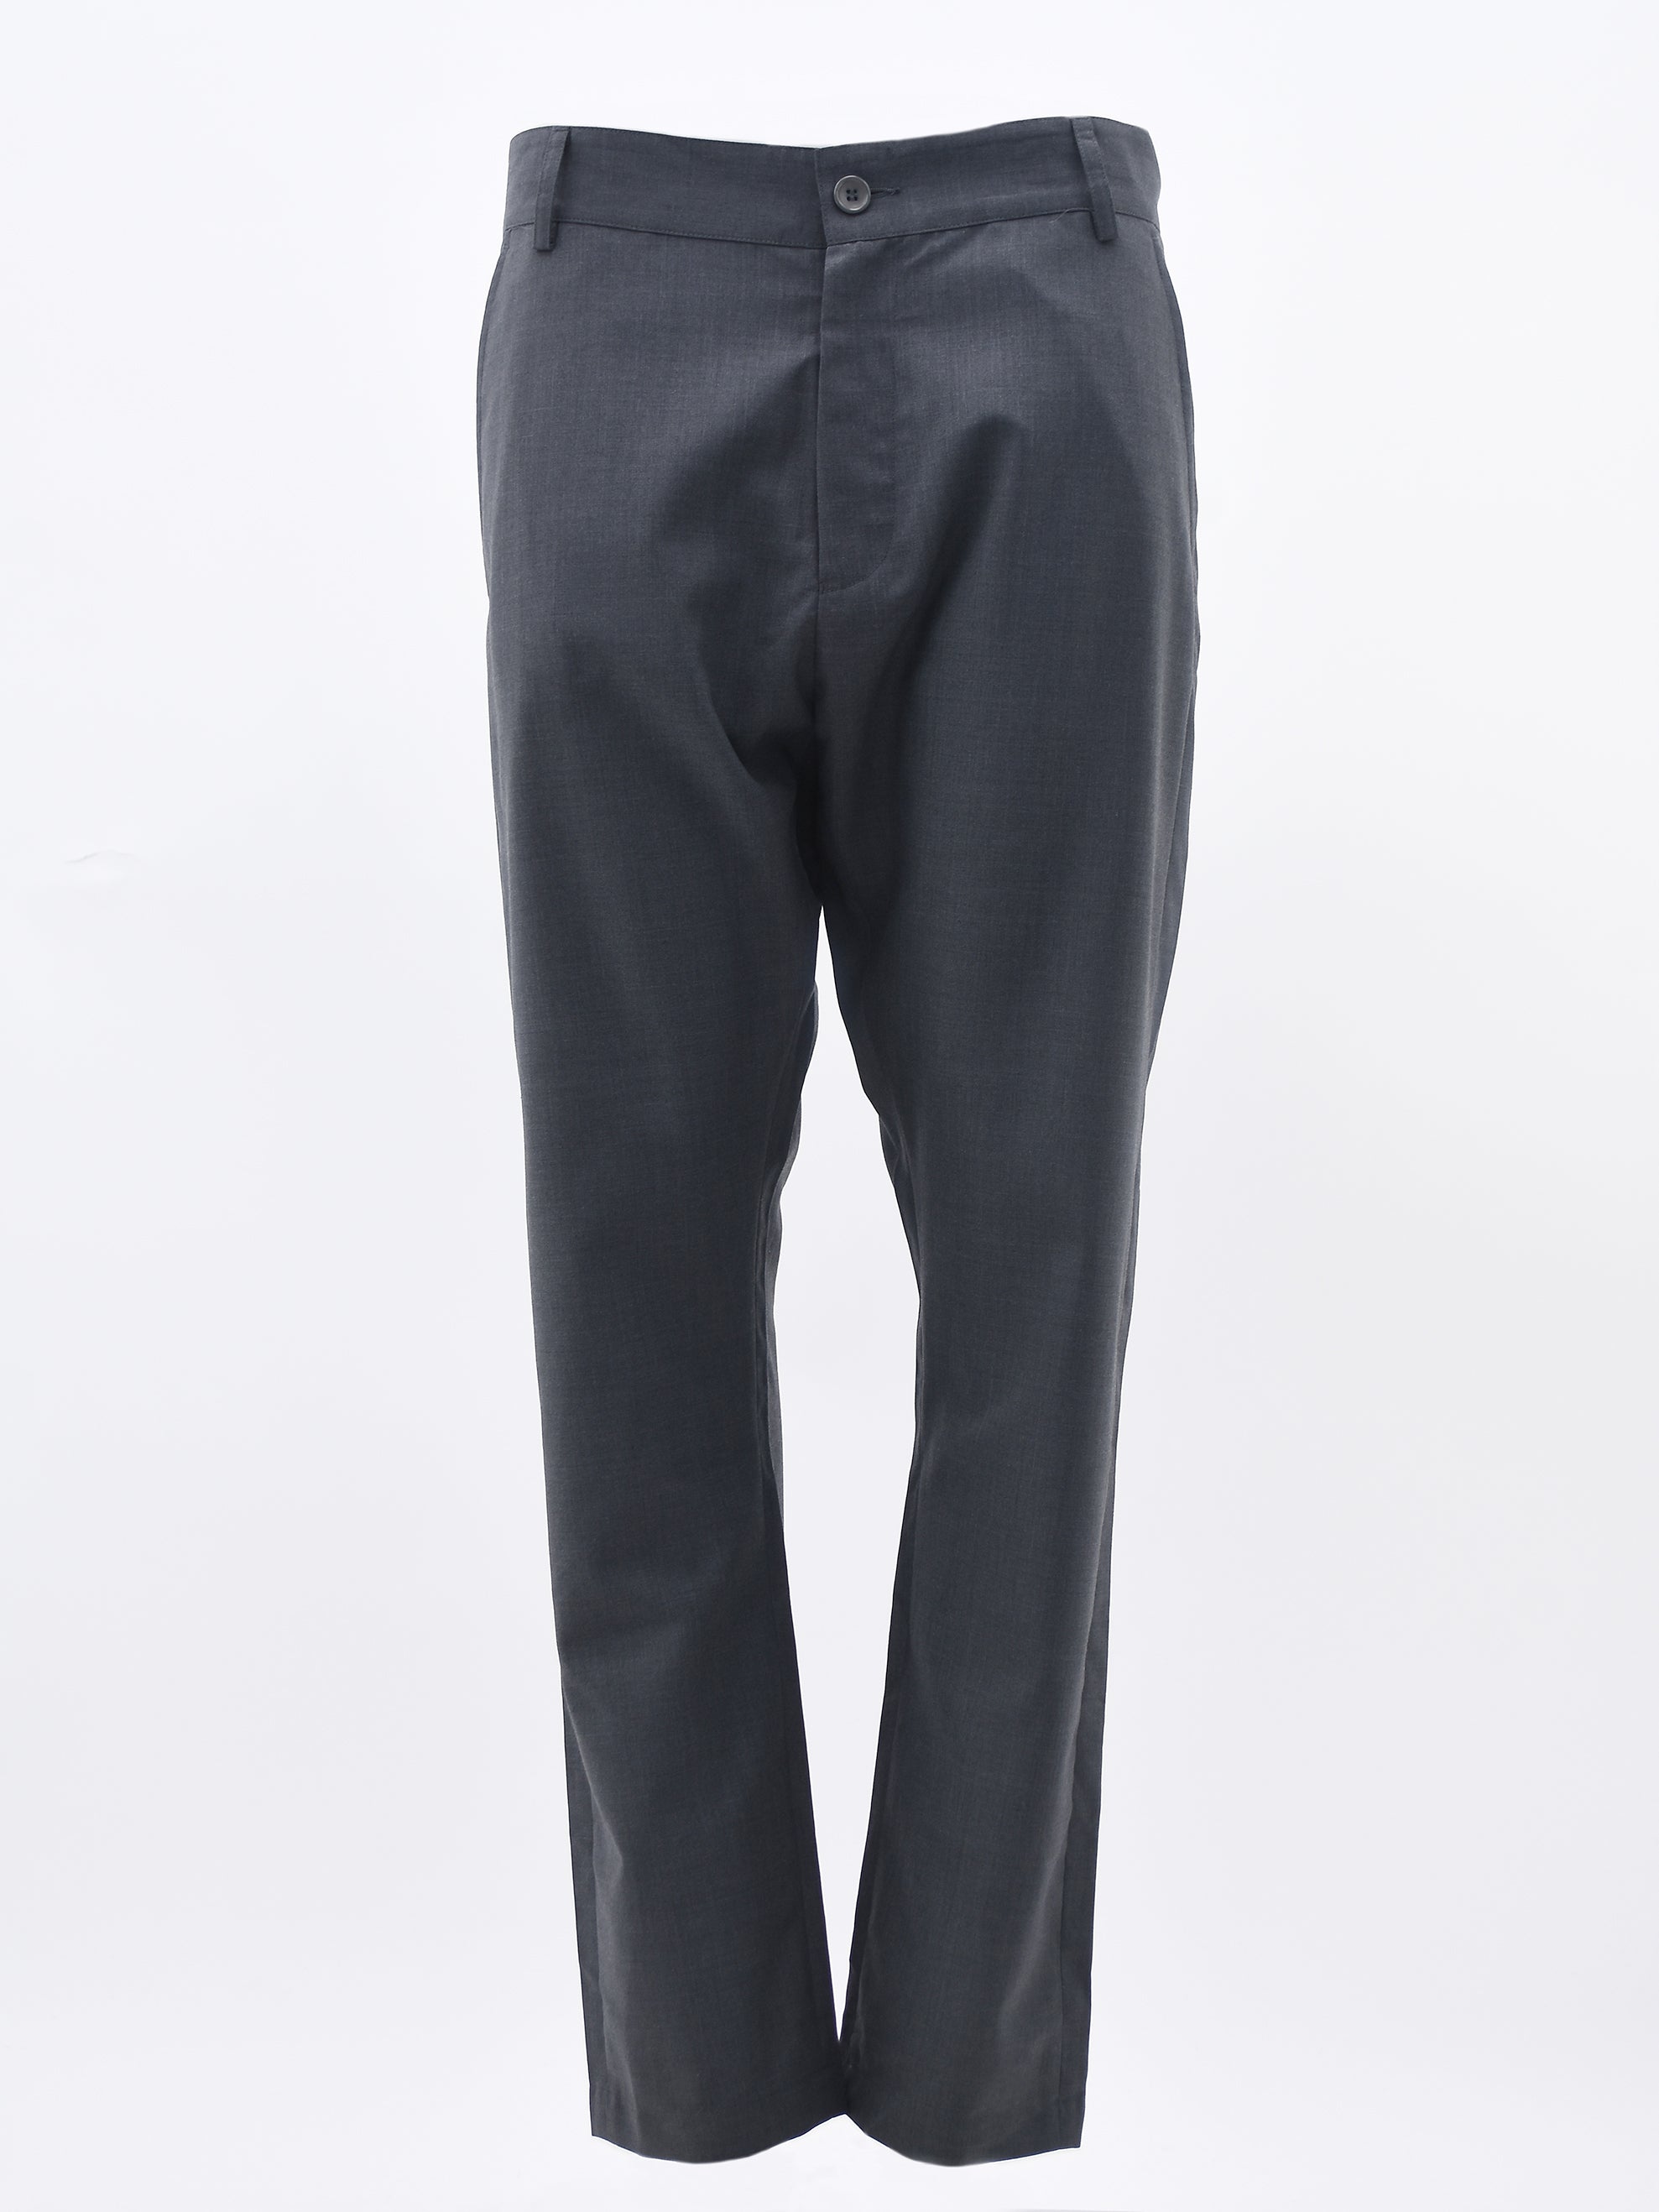 GREY WOOL SUIT TROUSERS